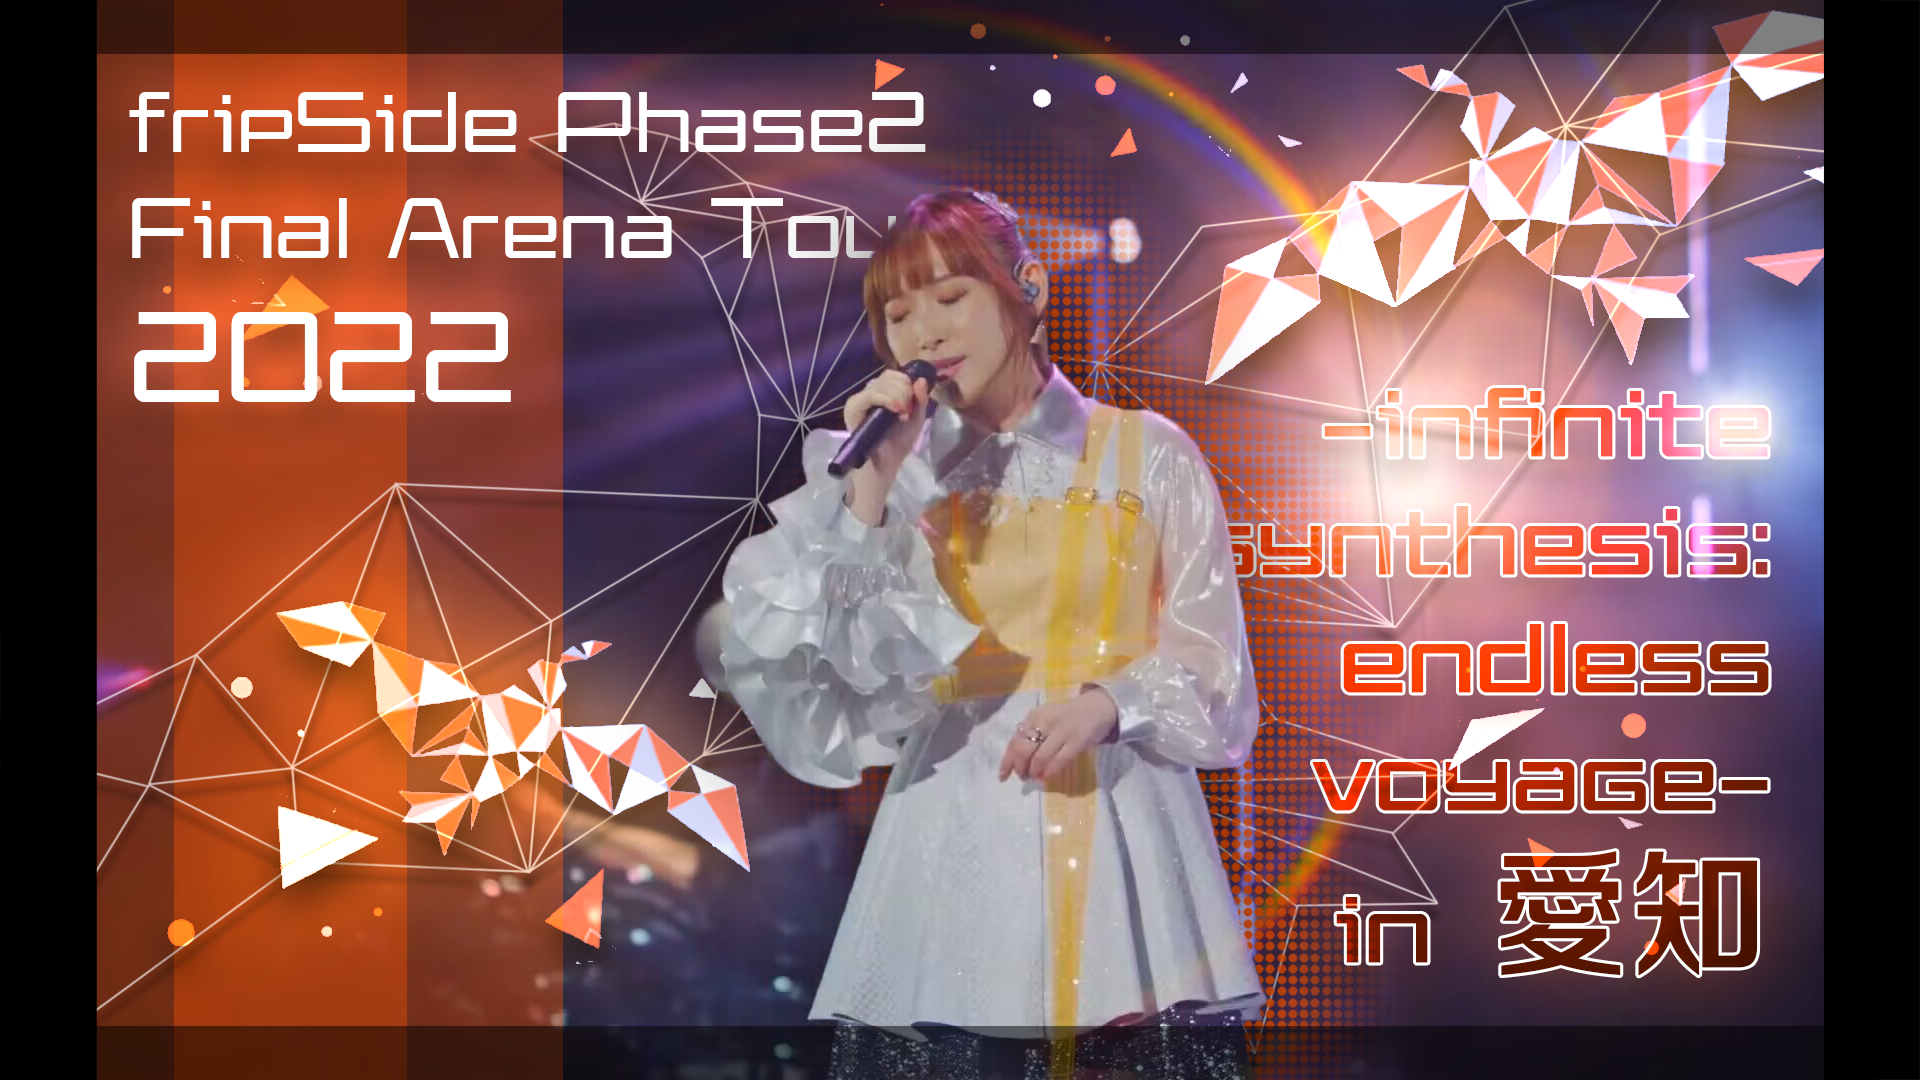 4K/中字】fripSide Phase2 Final Arena Tour 2022 in 愛知「麻将工作室